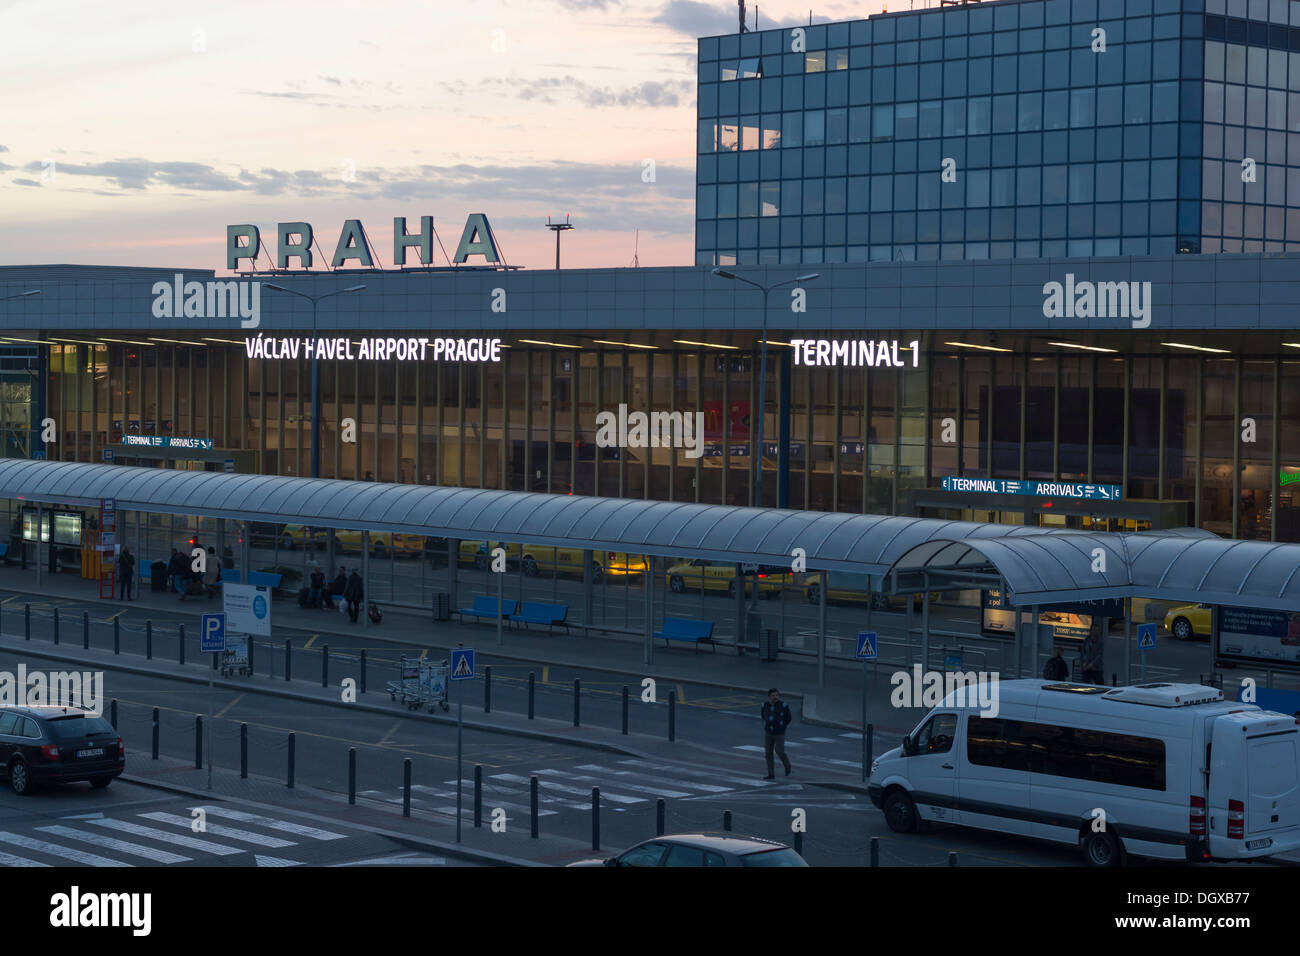 Vaclav Havel Airport Prague High Resolution Stock Photography and Images -  Alamy